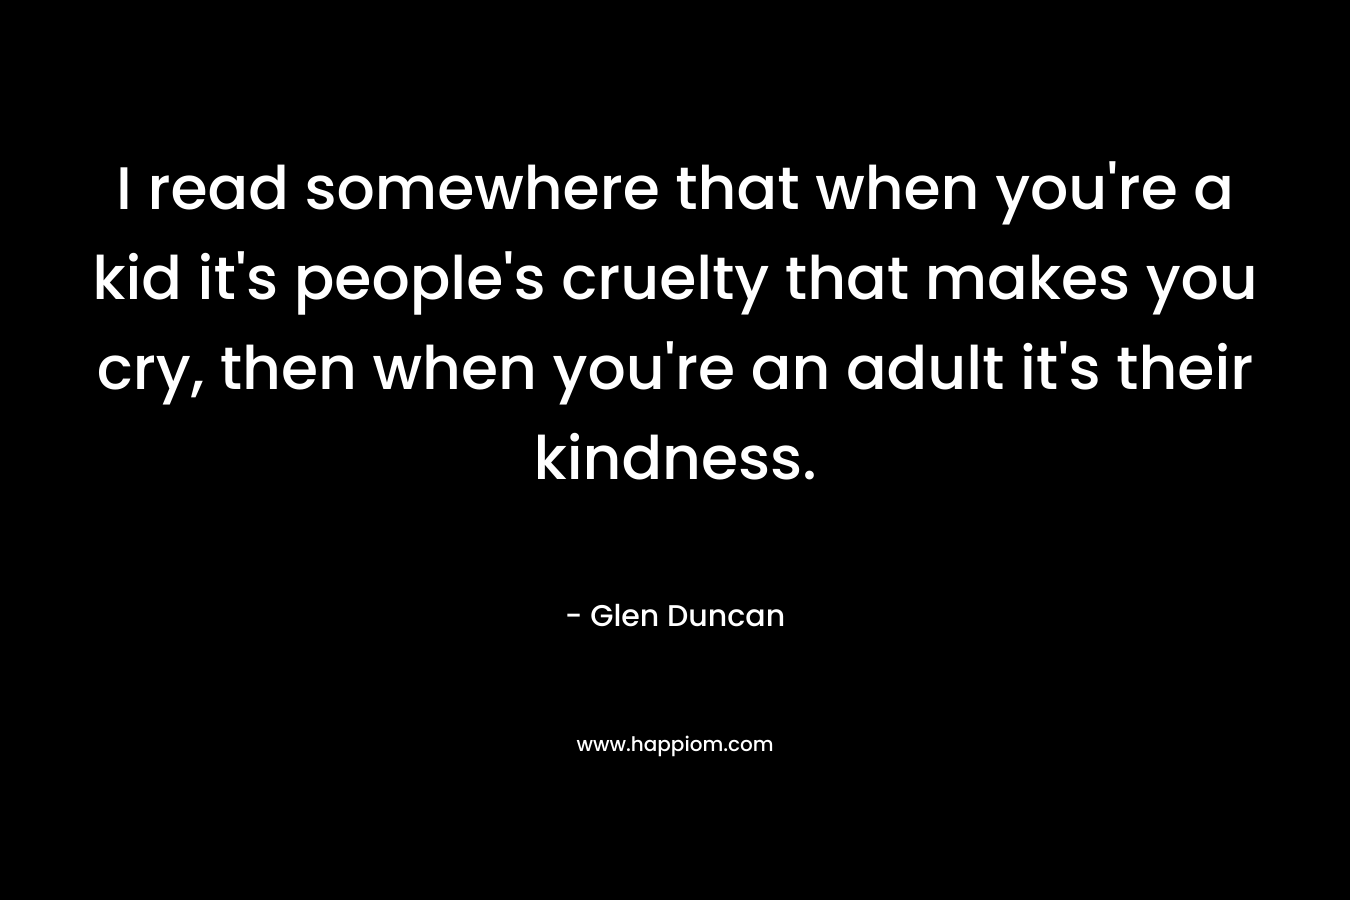 I read somewhere that when you’re a kid it’s people’s cruelty that makes you cry, then when you’re an adult it’s their kindness. – Glen Duncan